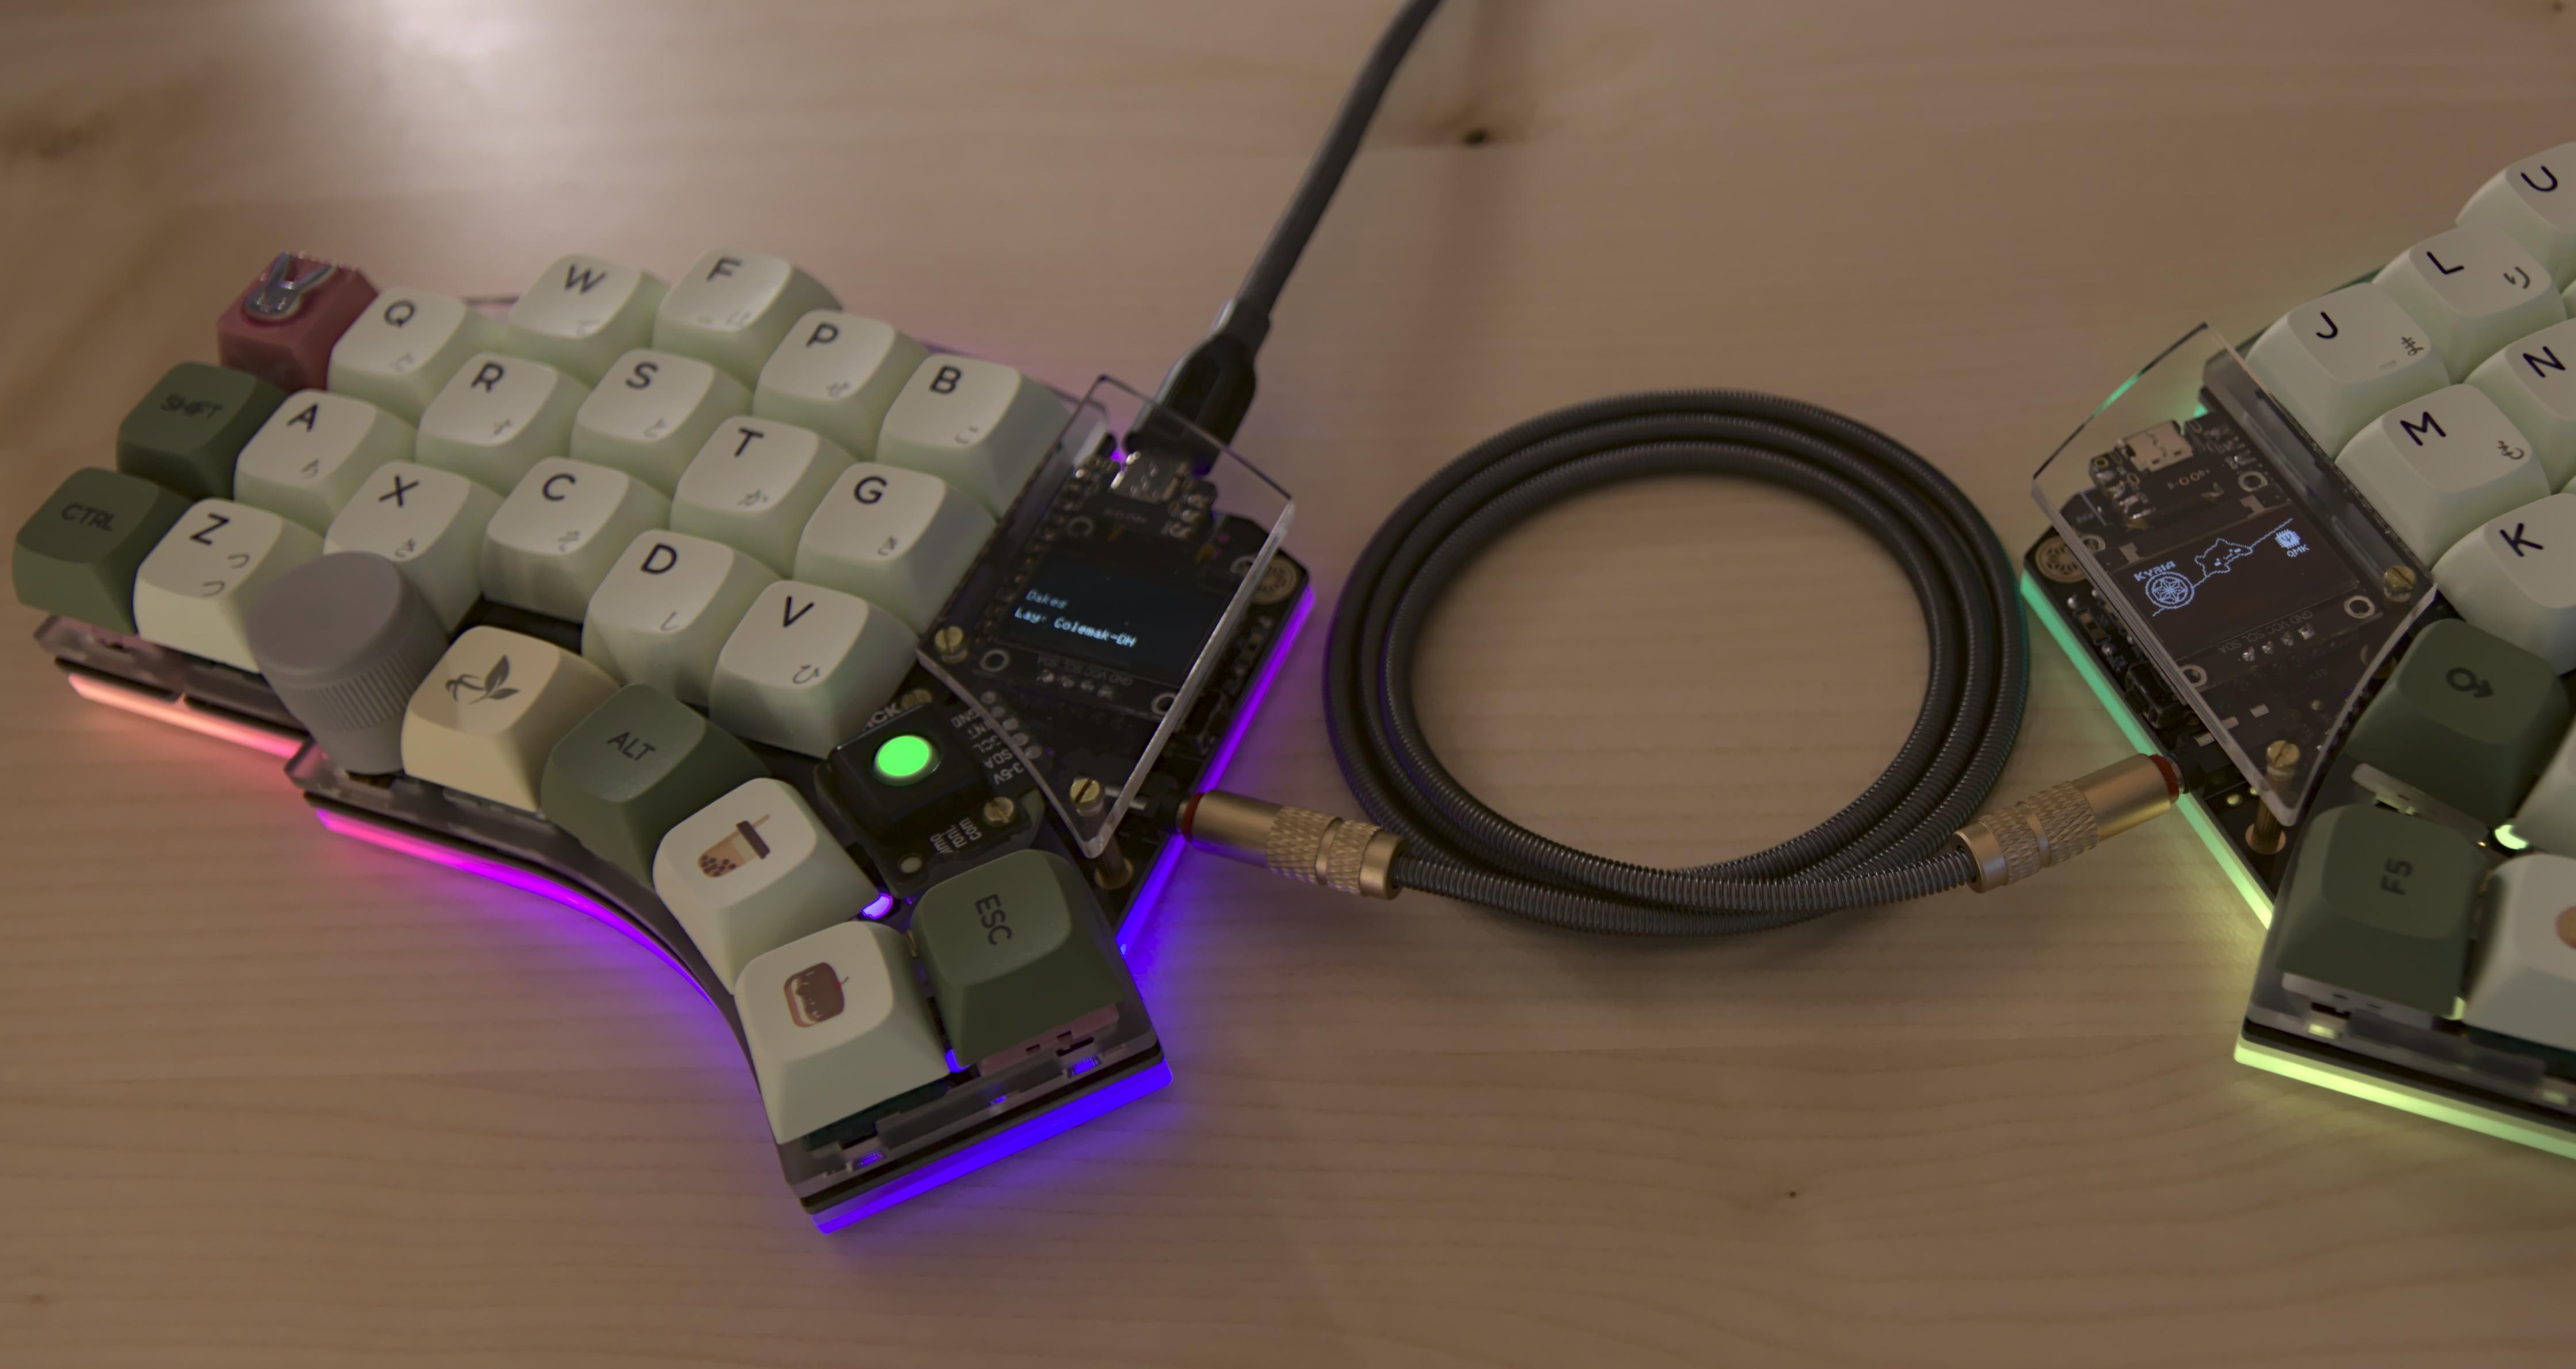 A split ergonomical keyboard, which uses column stagger with green keycaps and RGB underglow.